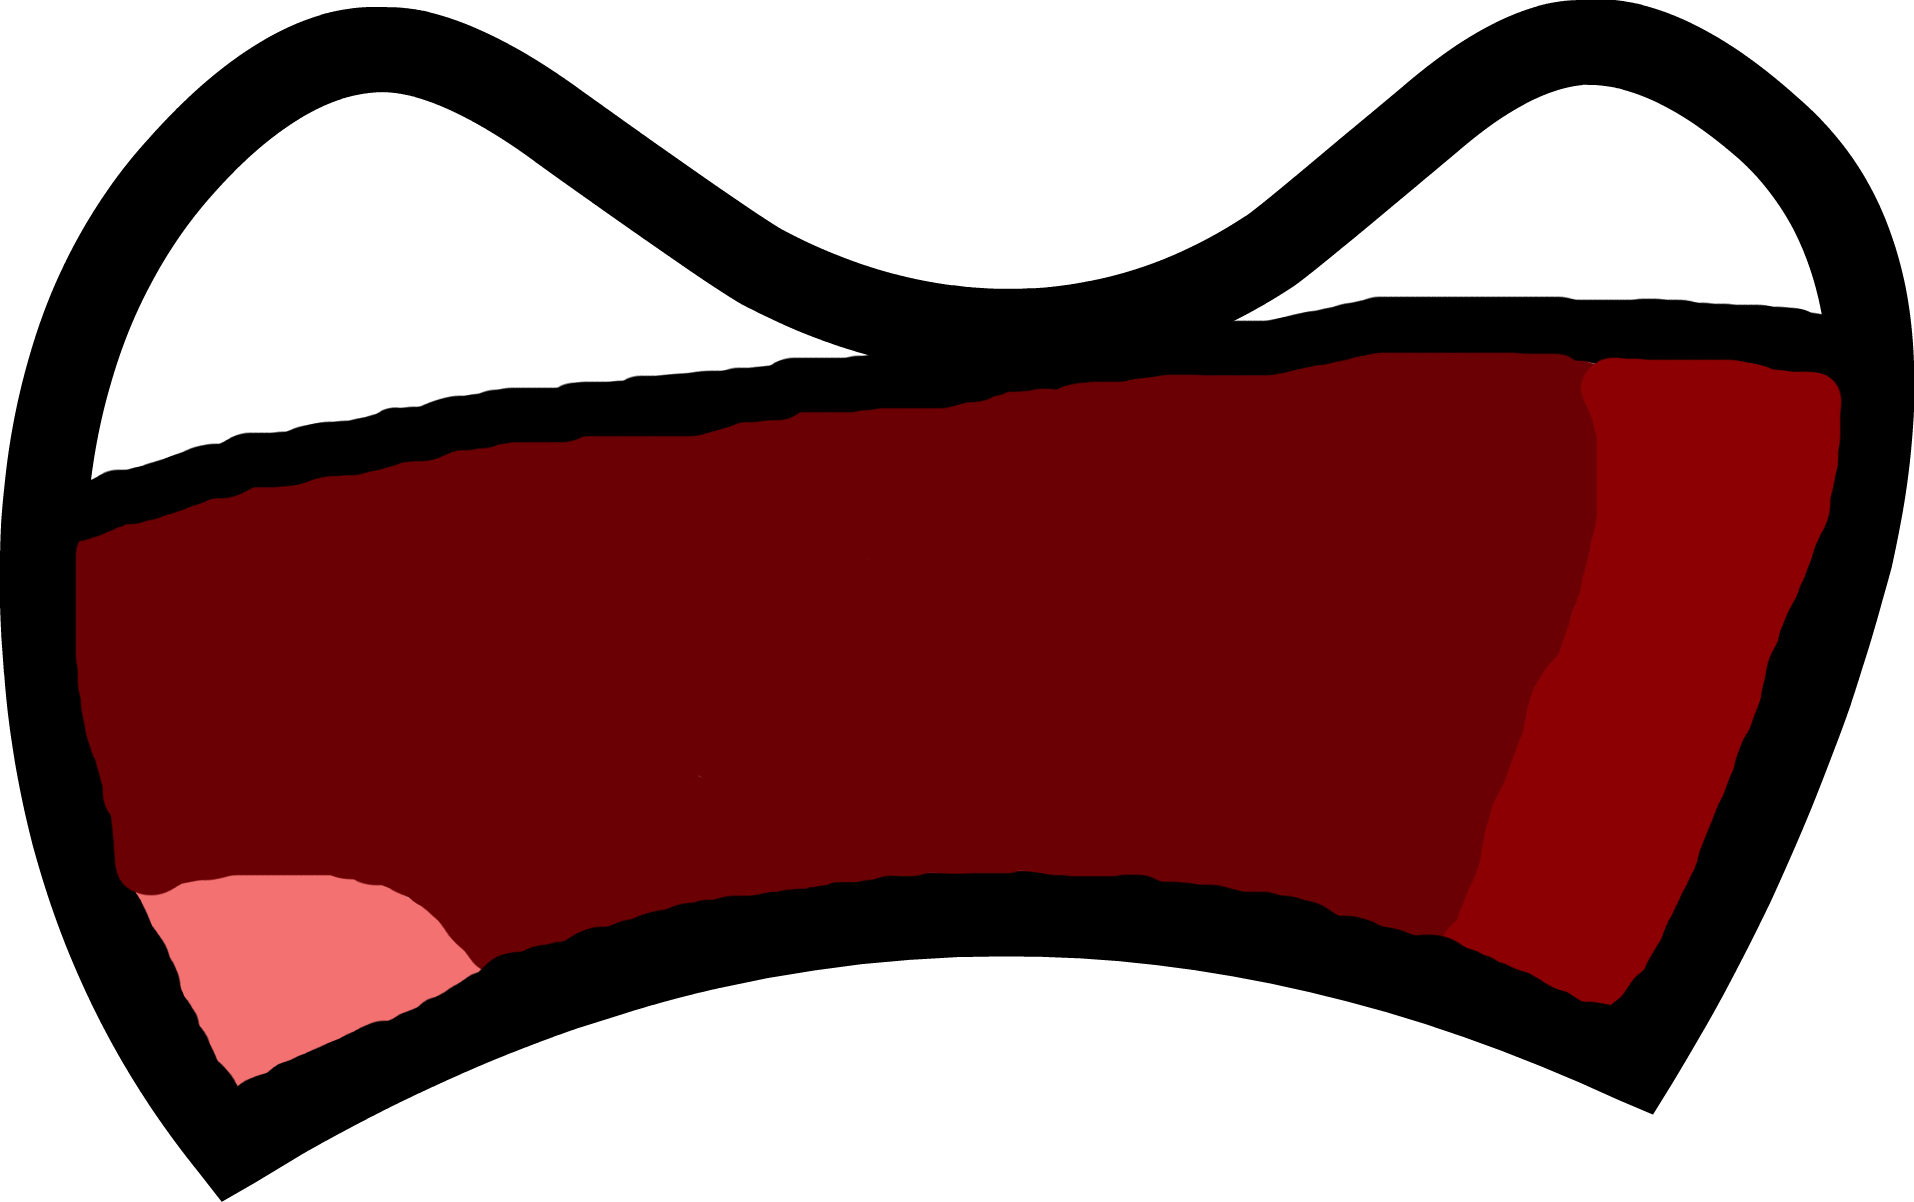 A Cartoon Face With Mouth And Teeth